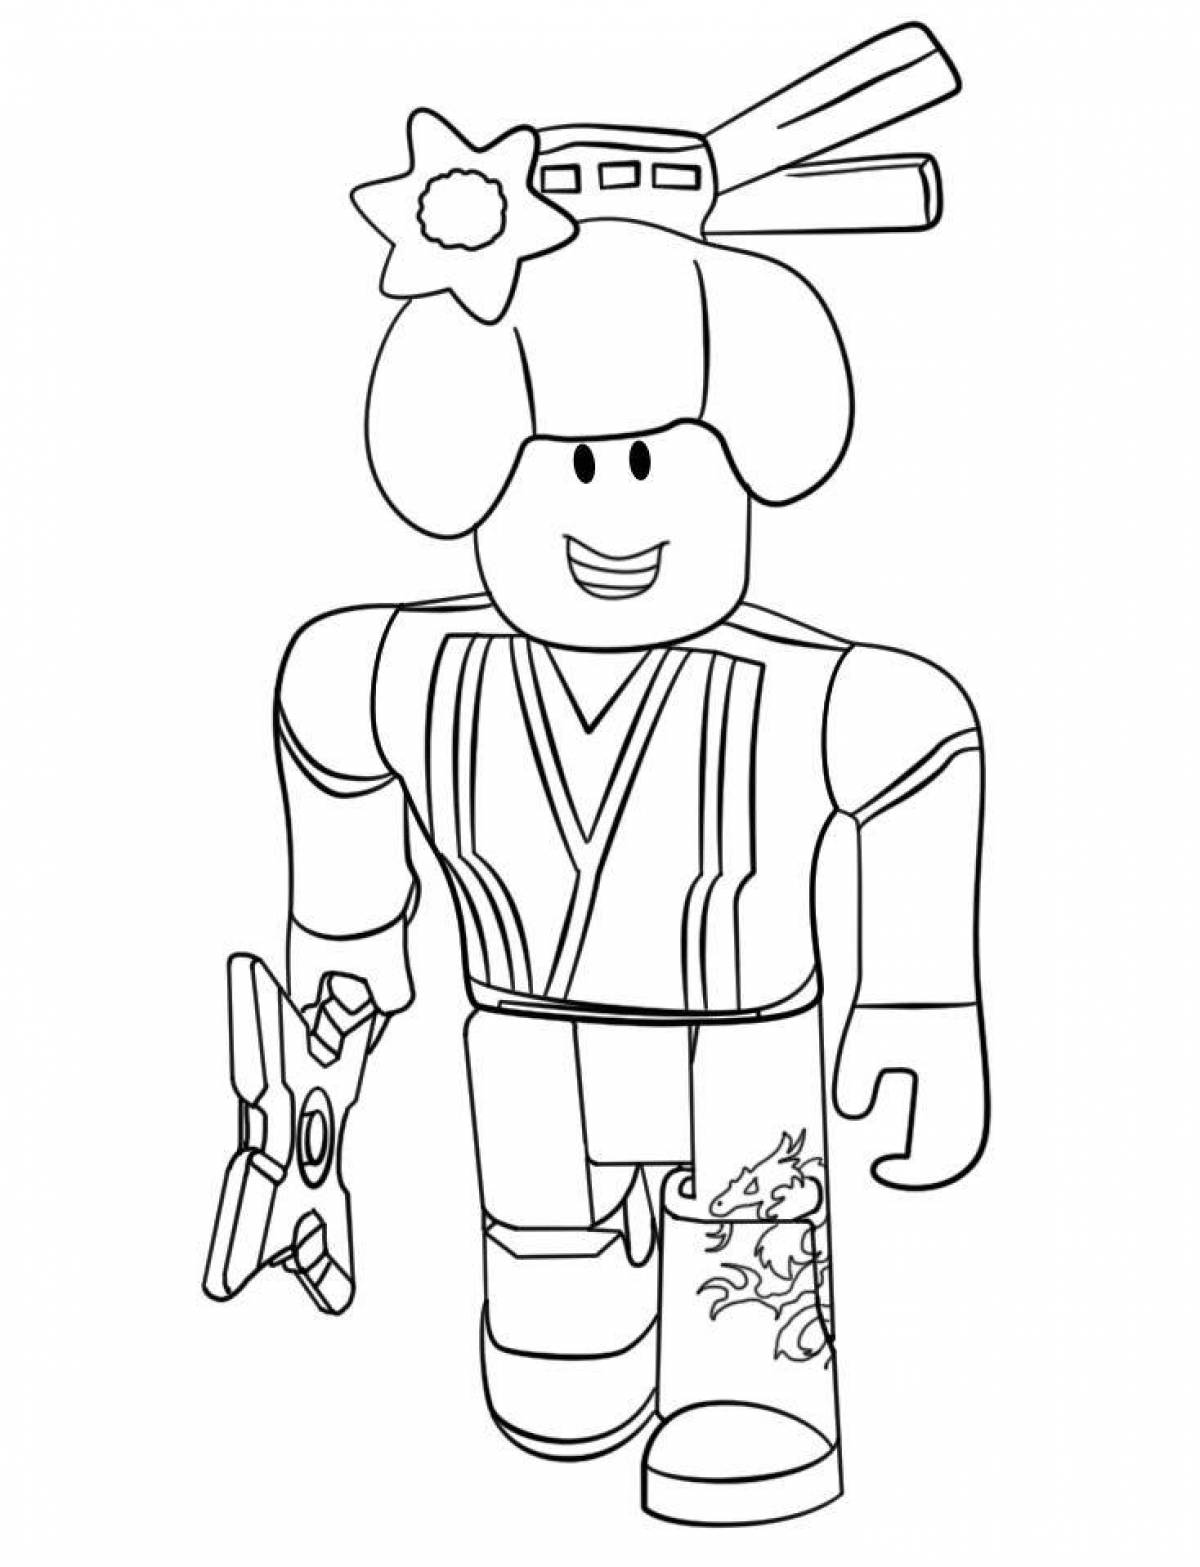 Roblox quality coloring book